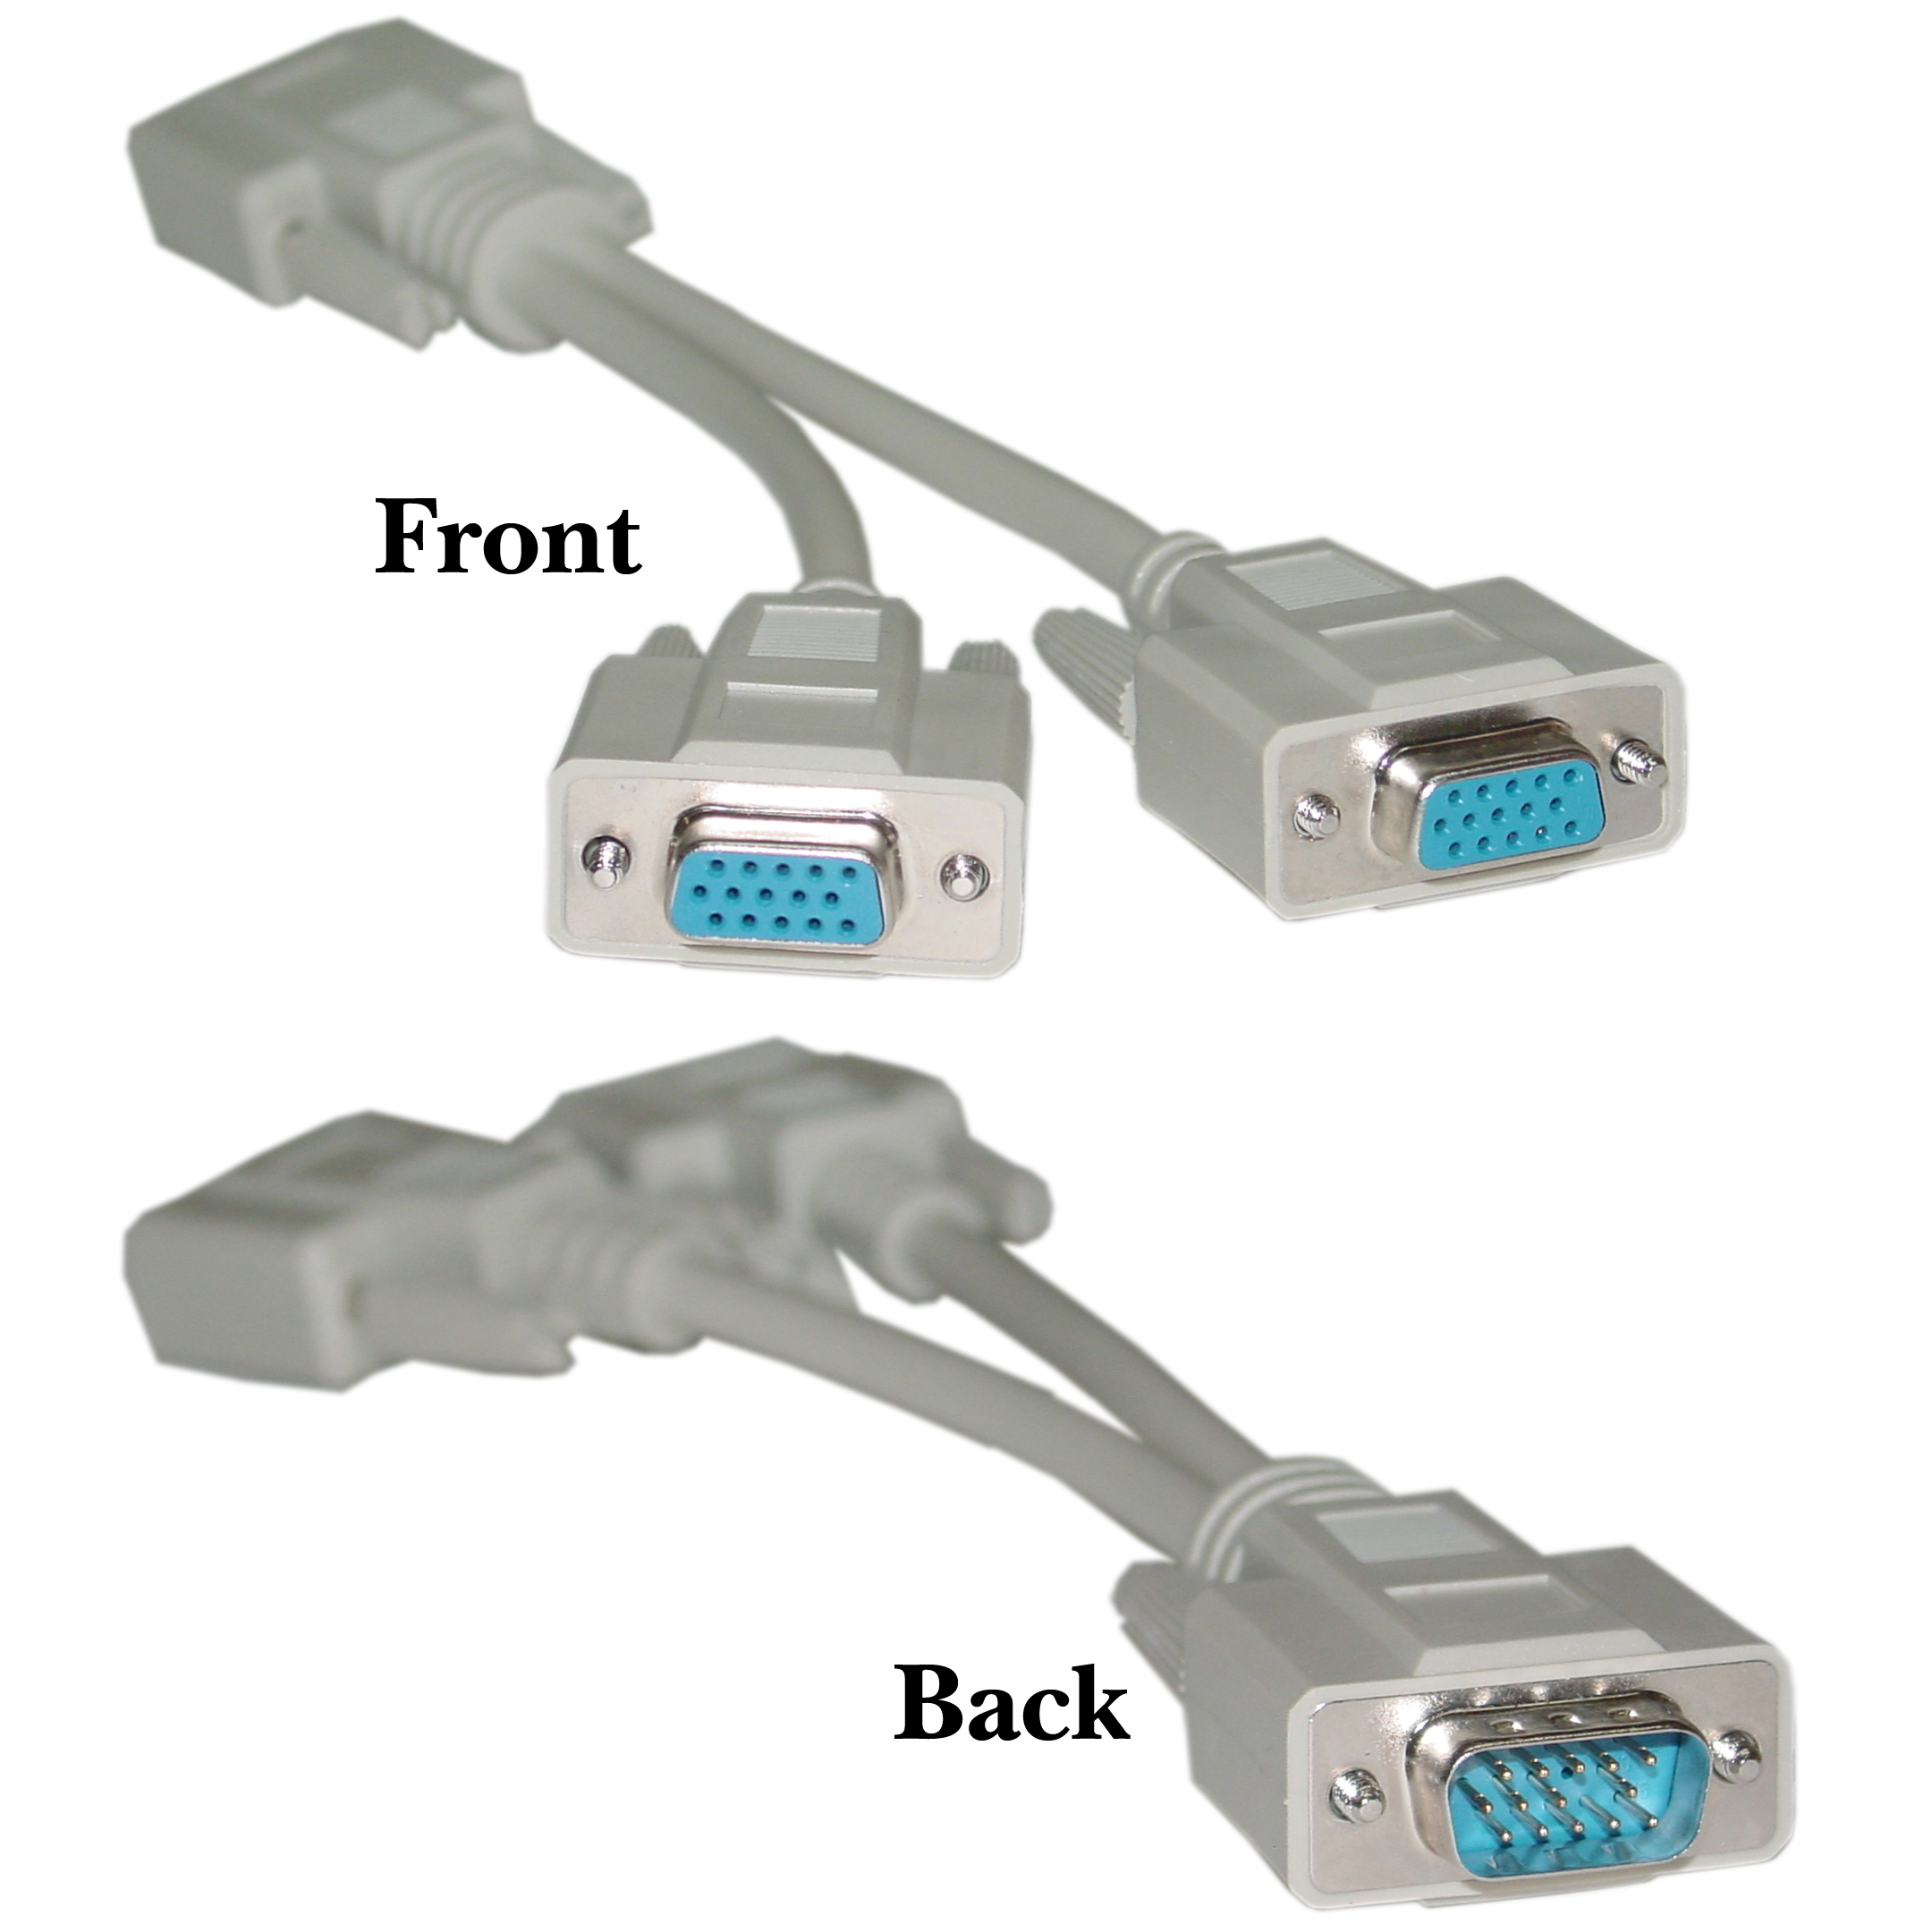 Adaptor Cables for Sale in Canada - Long McQuade